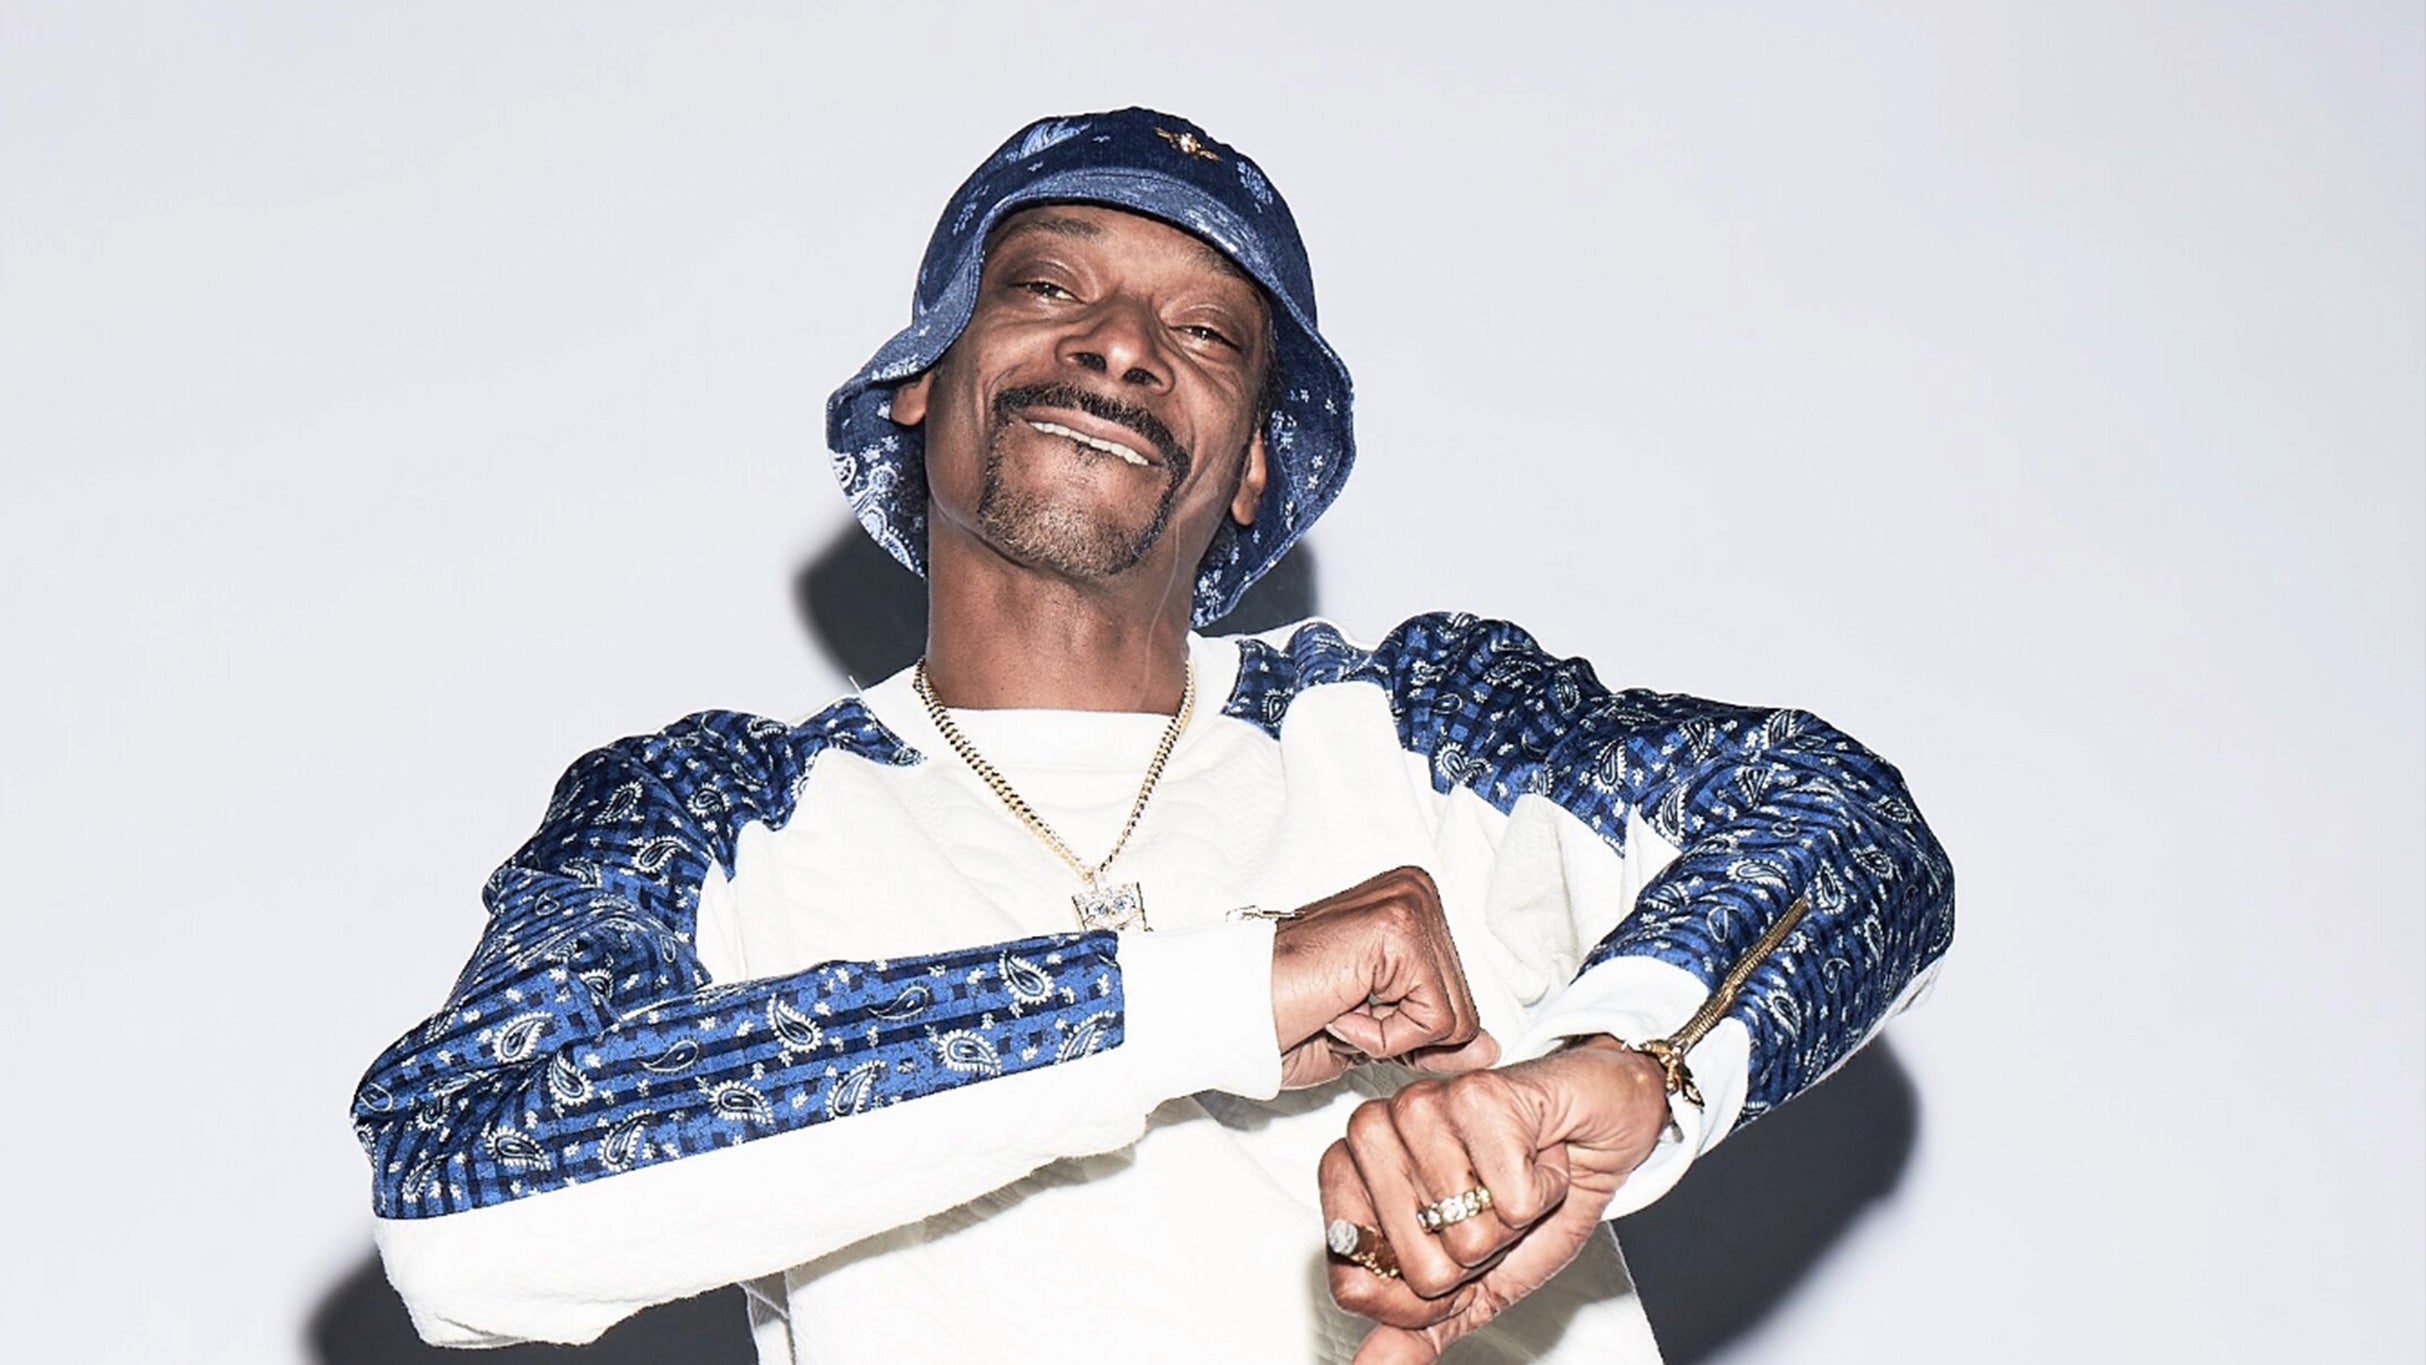 Snoop Dogg - Cali To Canada Tour  in Halifax promo photo for Amex FOL / Platinum presale offer code